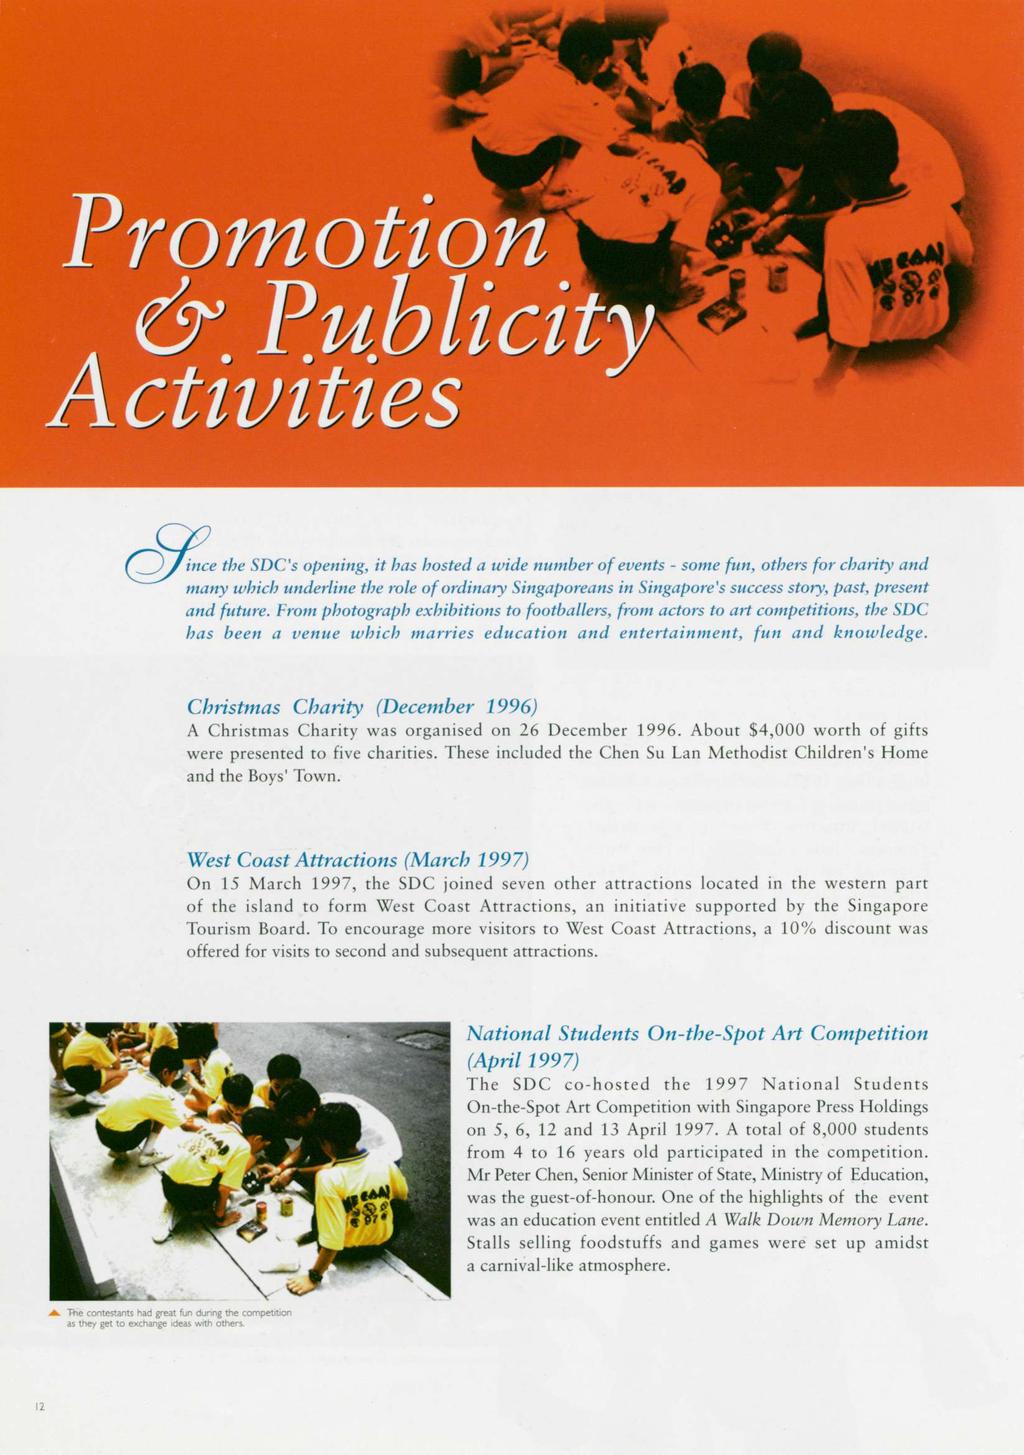 Promotion Publicity Activities / ince the SDC's opening, it has hosted a wide number of events - some fun, others for charily and many which underline the role of ordinary Singaporeans in Singapore's